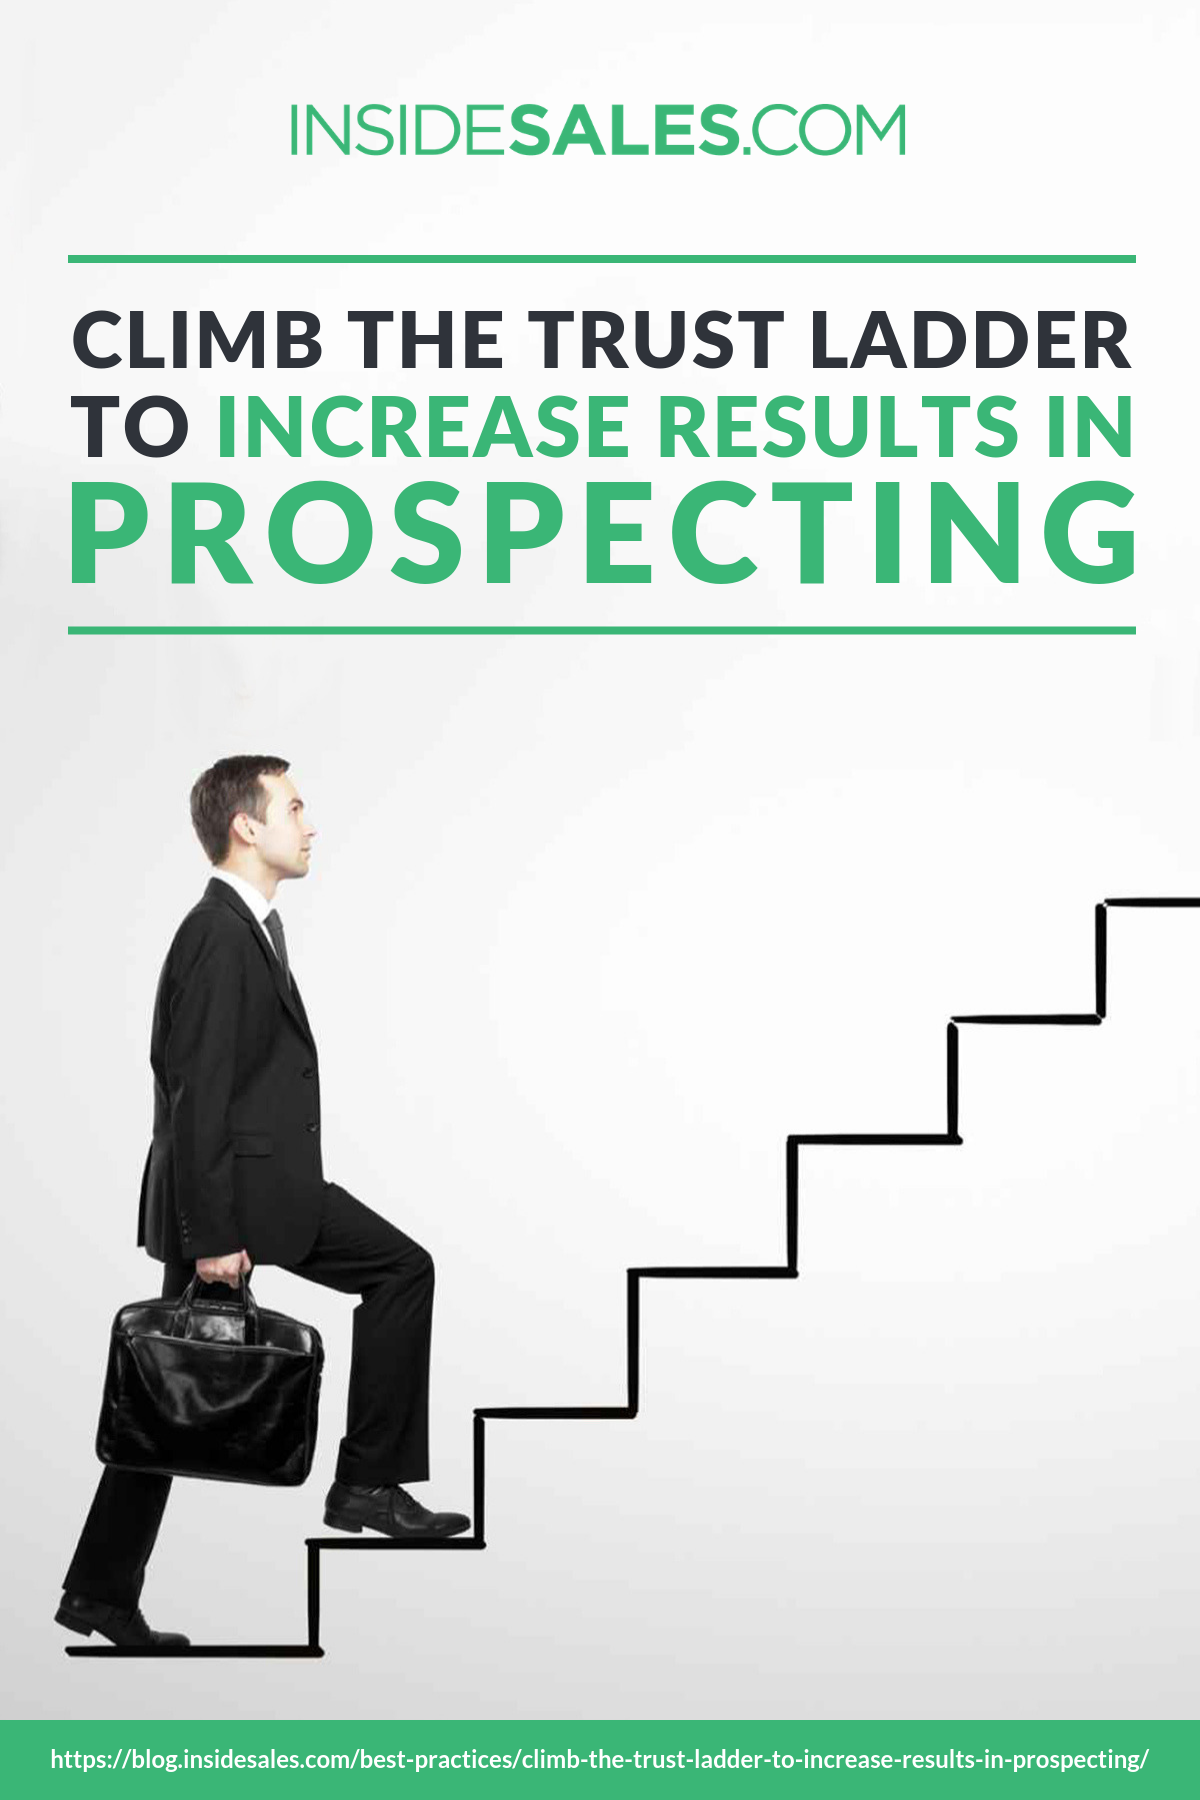 Climb The Trust Ladder To Increase Results In Prospecting https://www.insidesales.com/blog/best-practices/climb-the-trust-ladder-to-increase-results-in-prospecting/